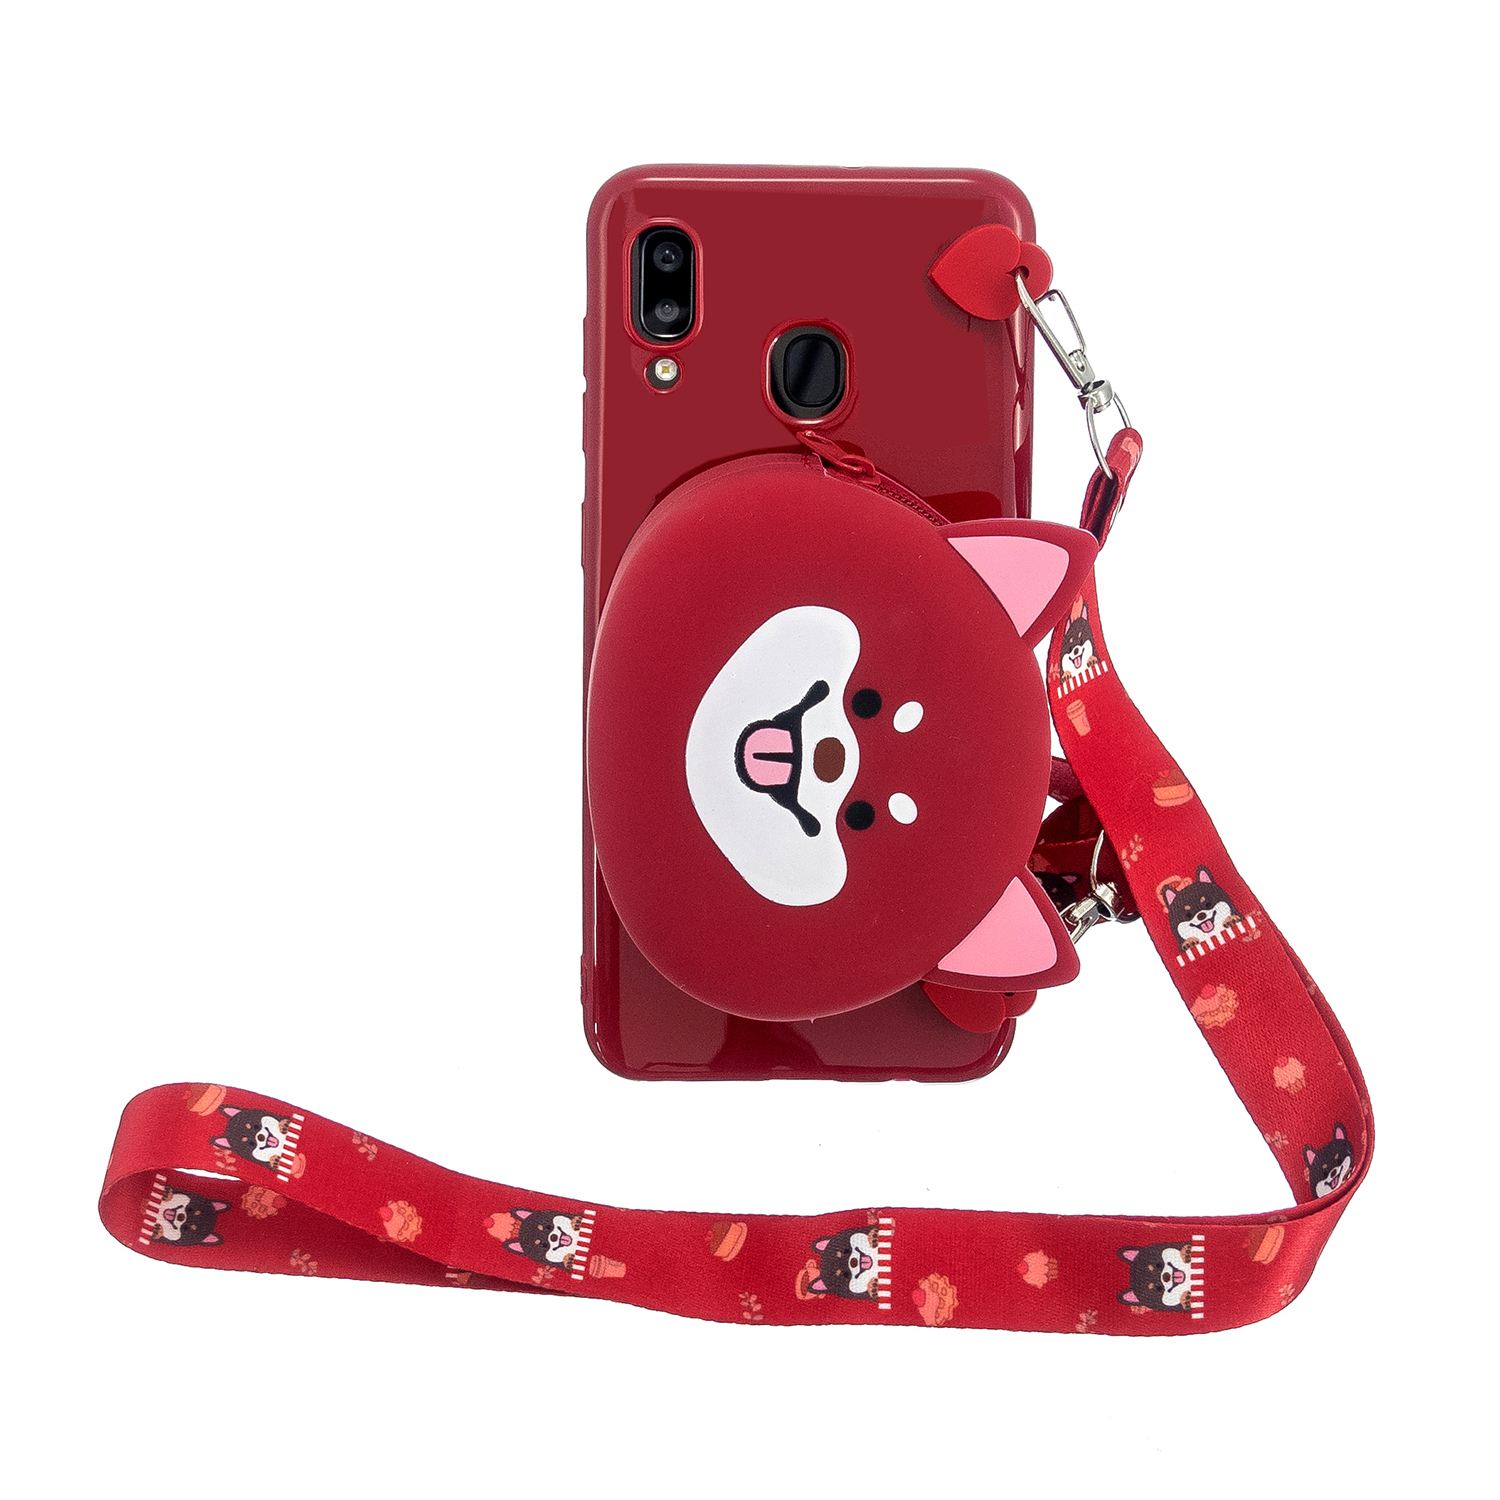 For Samsung A10/A20/A30 Case Mobile Phone Shell Shockproof TPU Cellphone Cover with Cartoon Cat Pig Panda Coin Purse Lovely Shoulder Starp  Red